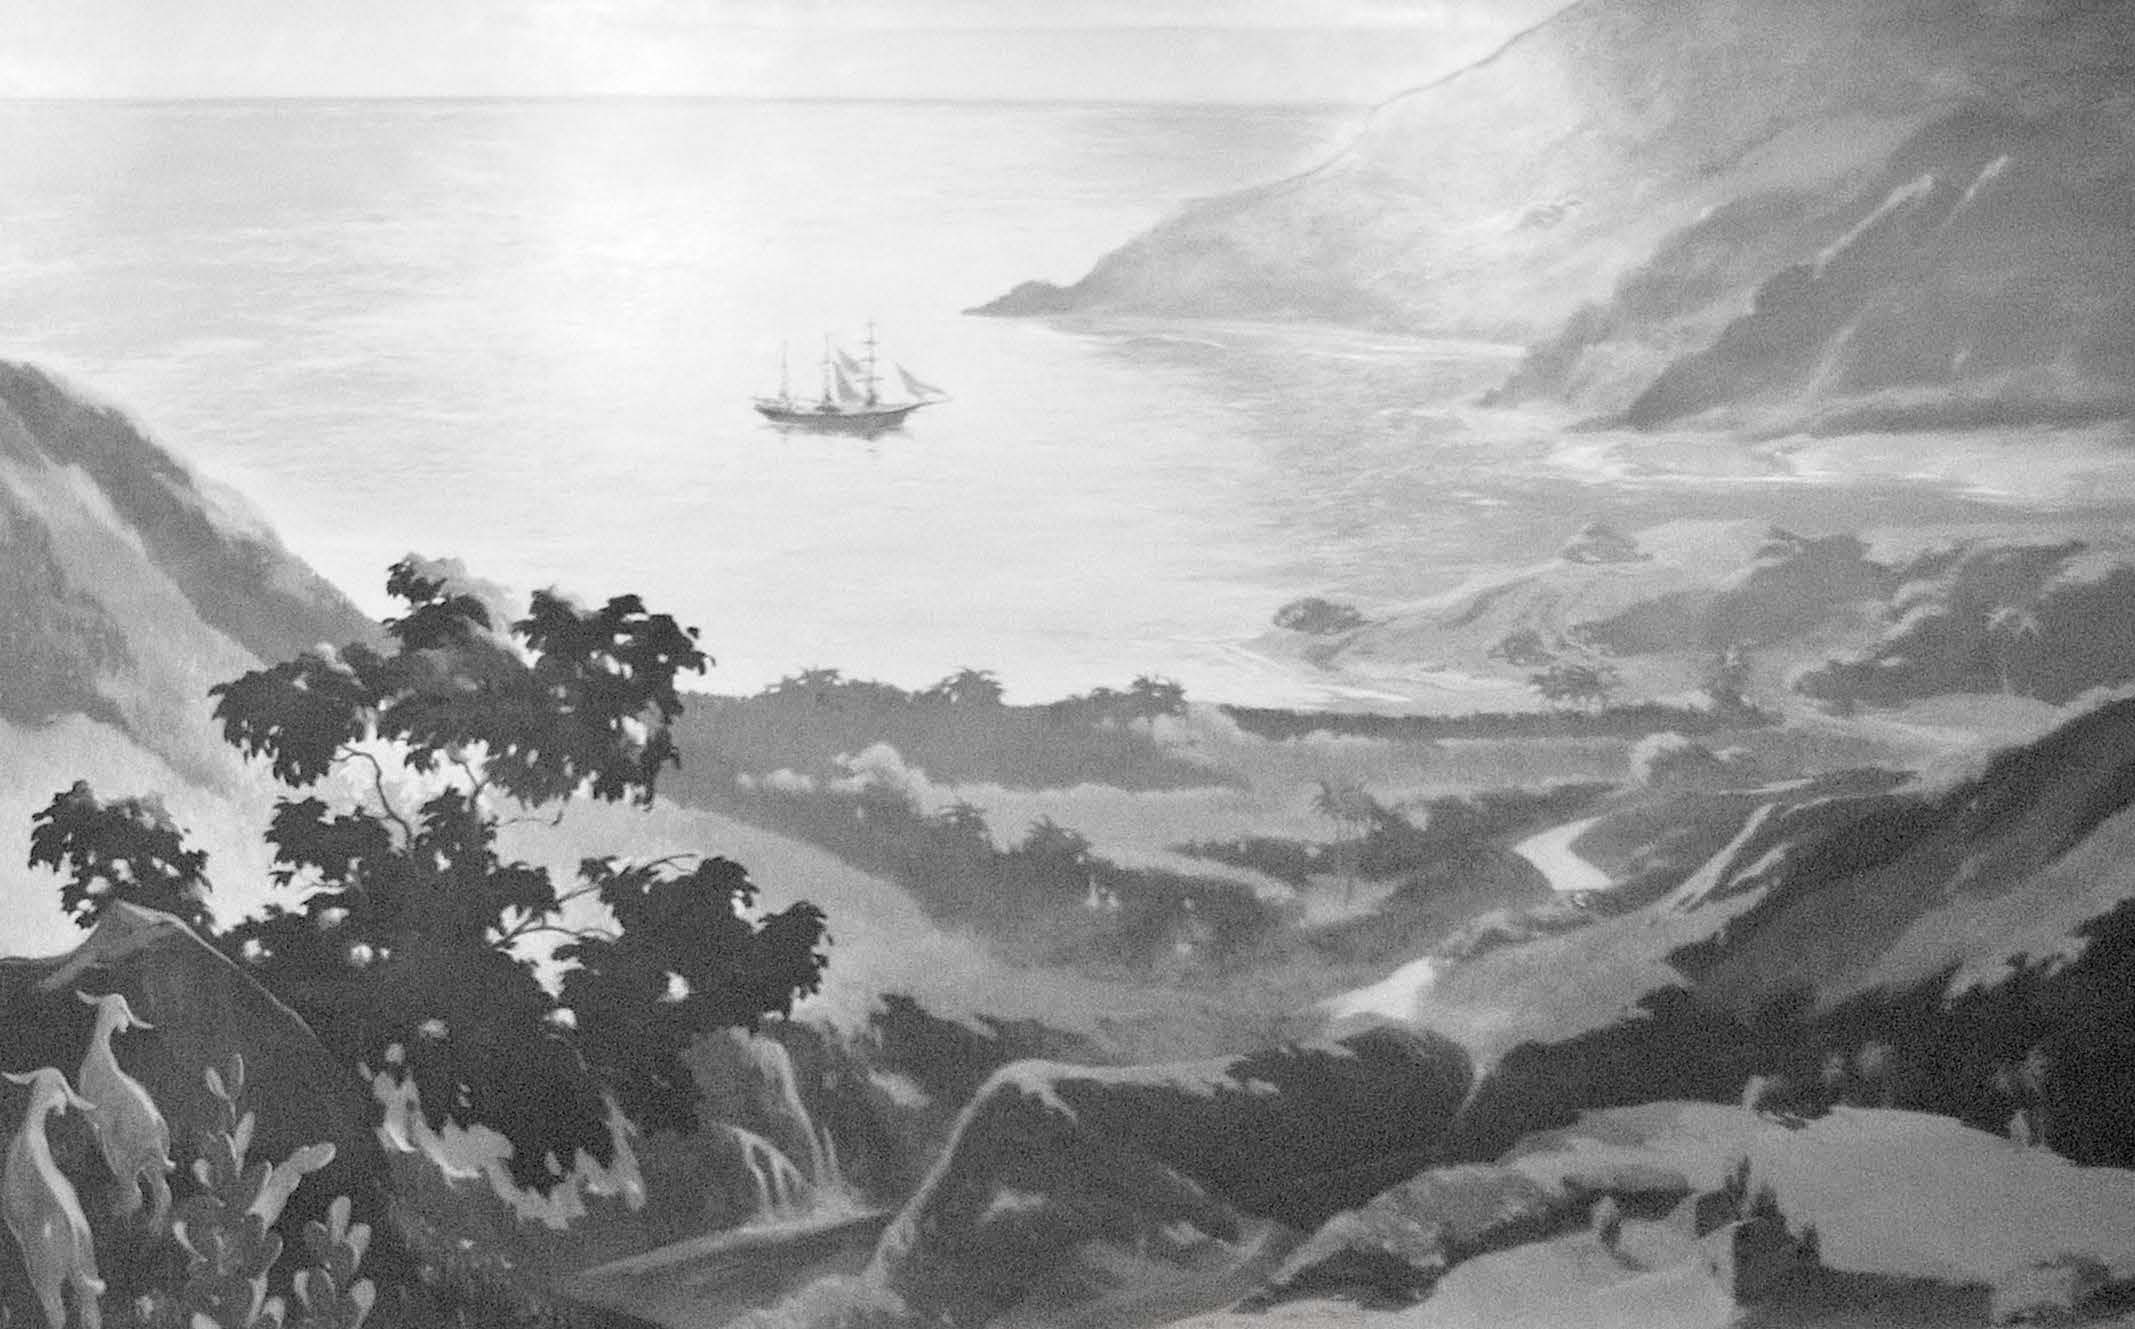 Under the direction of Brigham Young, ten missionaries arrived in Hawai‘i on 12 December 1850. The next day they climbed a nearby mountain, built an altar, and dedicated the Hawaiian Islands for the preaching of the gospel. Mural located in the David O. McKay Building foyer, BYU–Hawaii campus. Photo by Monique Saenz courtesy of BYU–Hawaii.